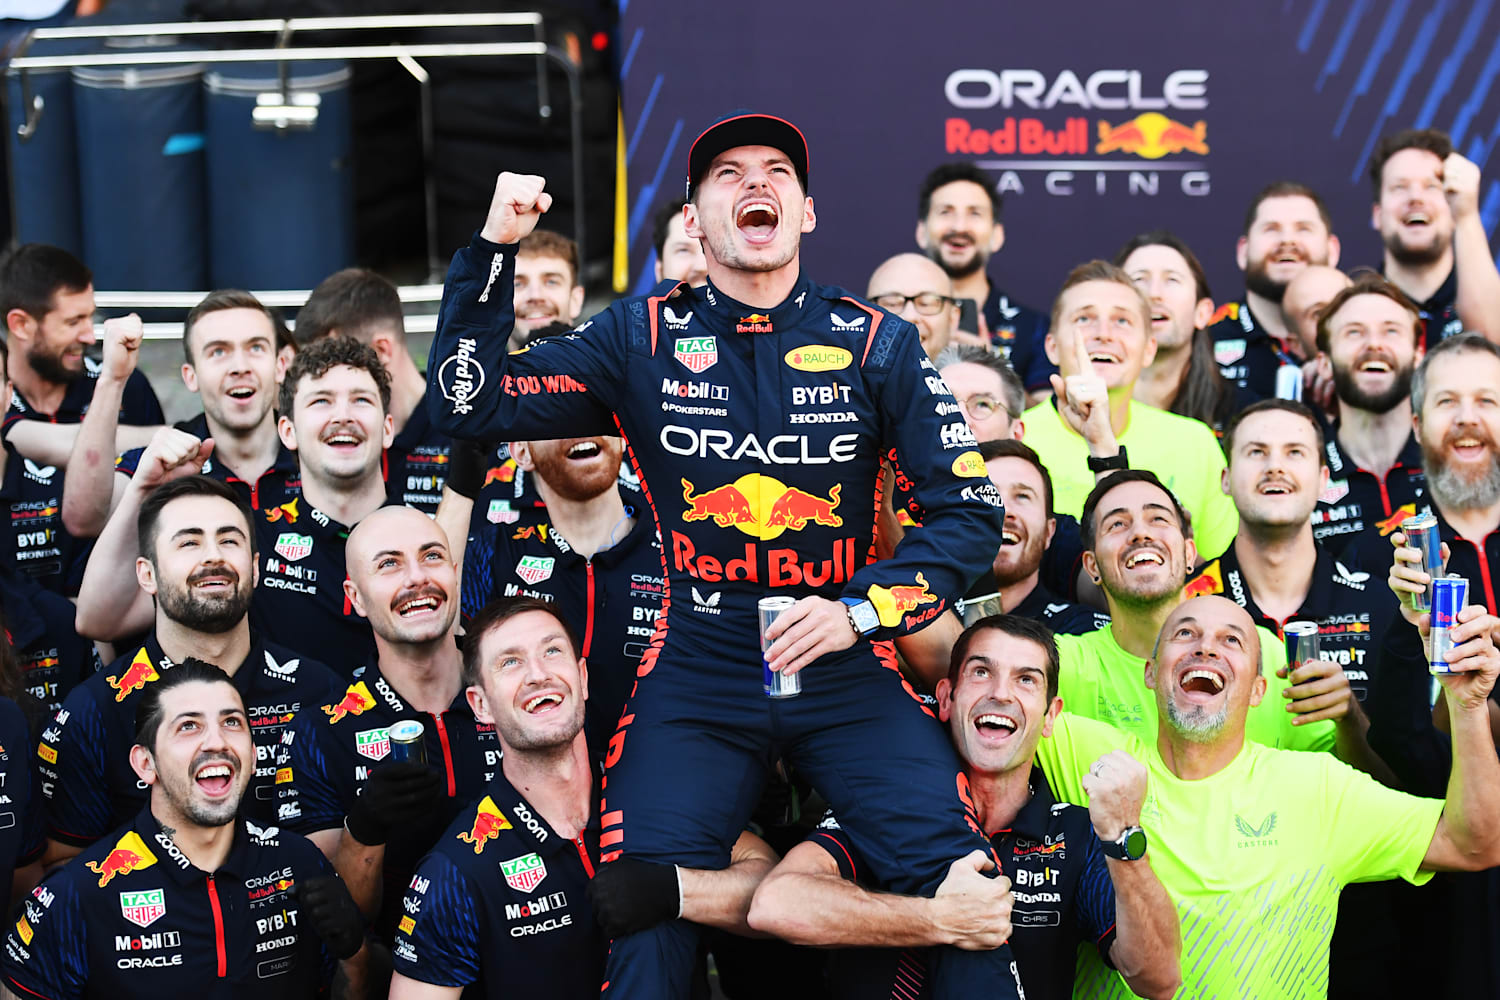 Max Verstappen wins F1 2022 world title - These were the defining